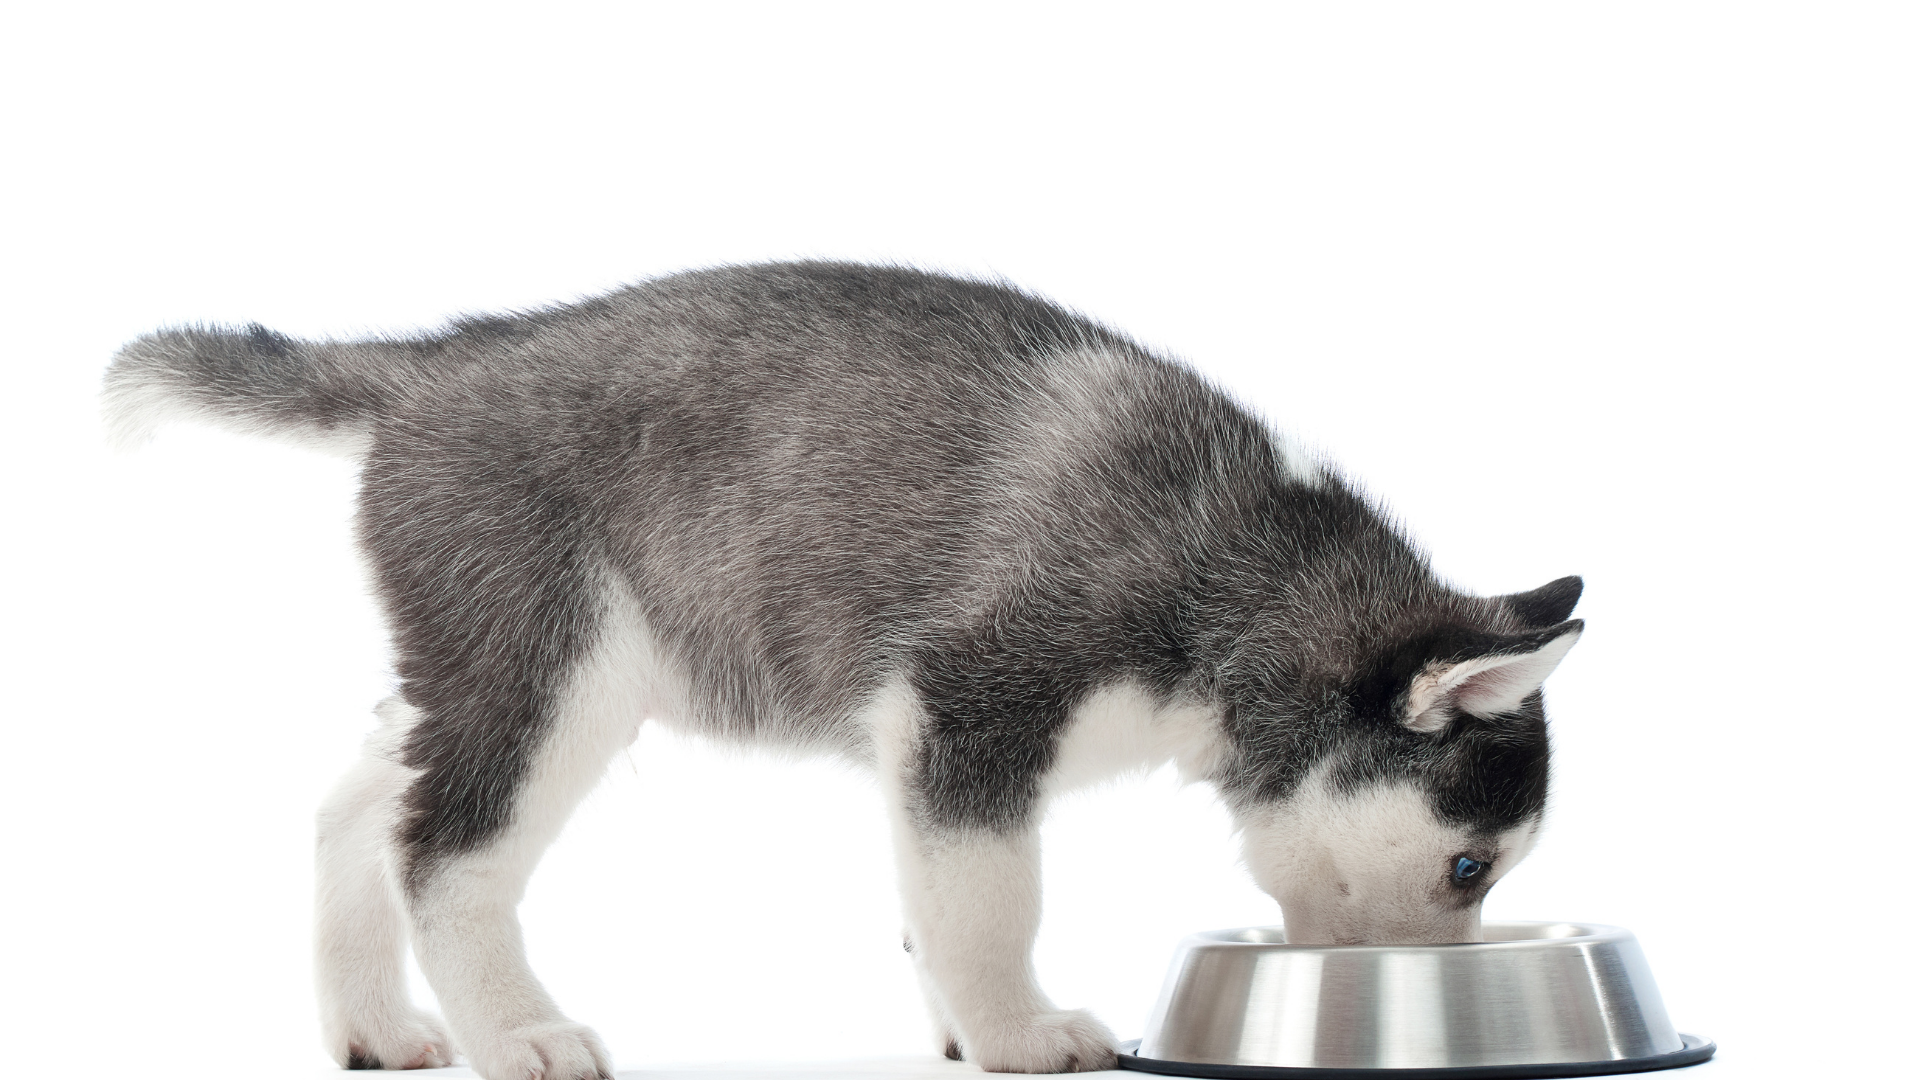 Foods you should never feed your puppy